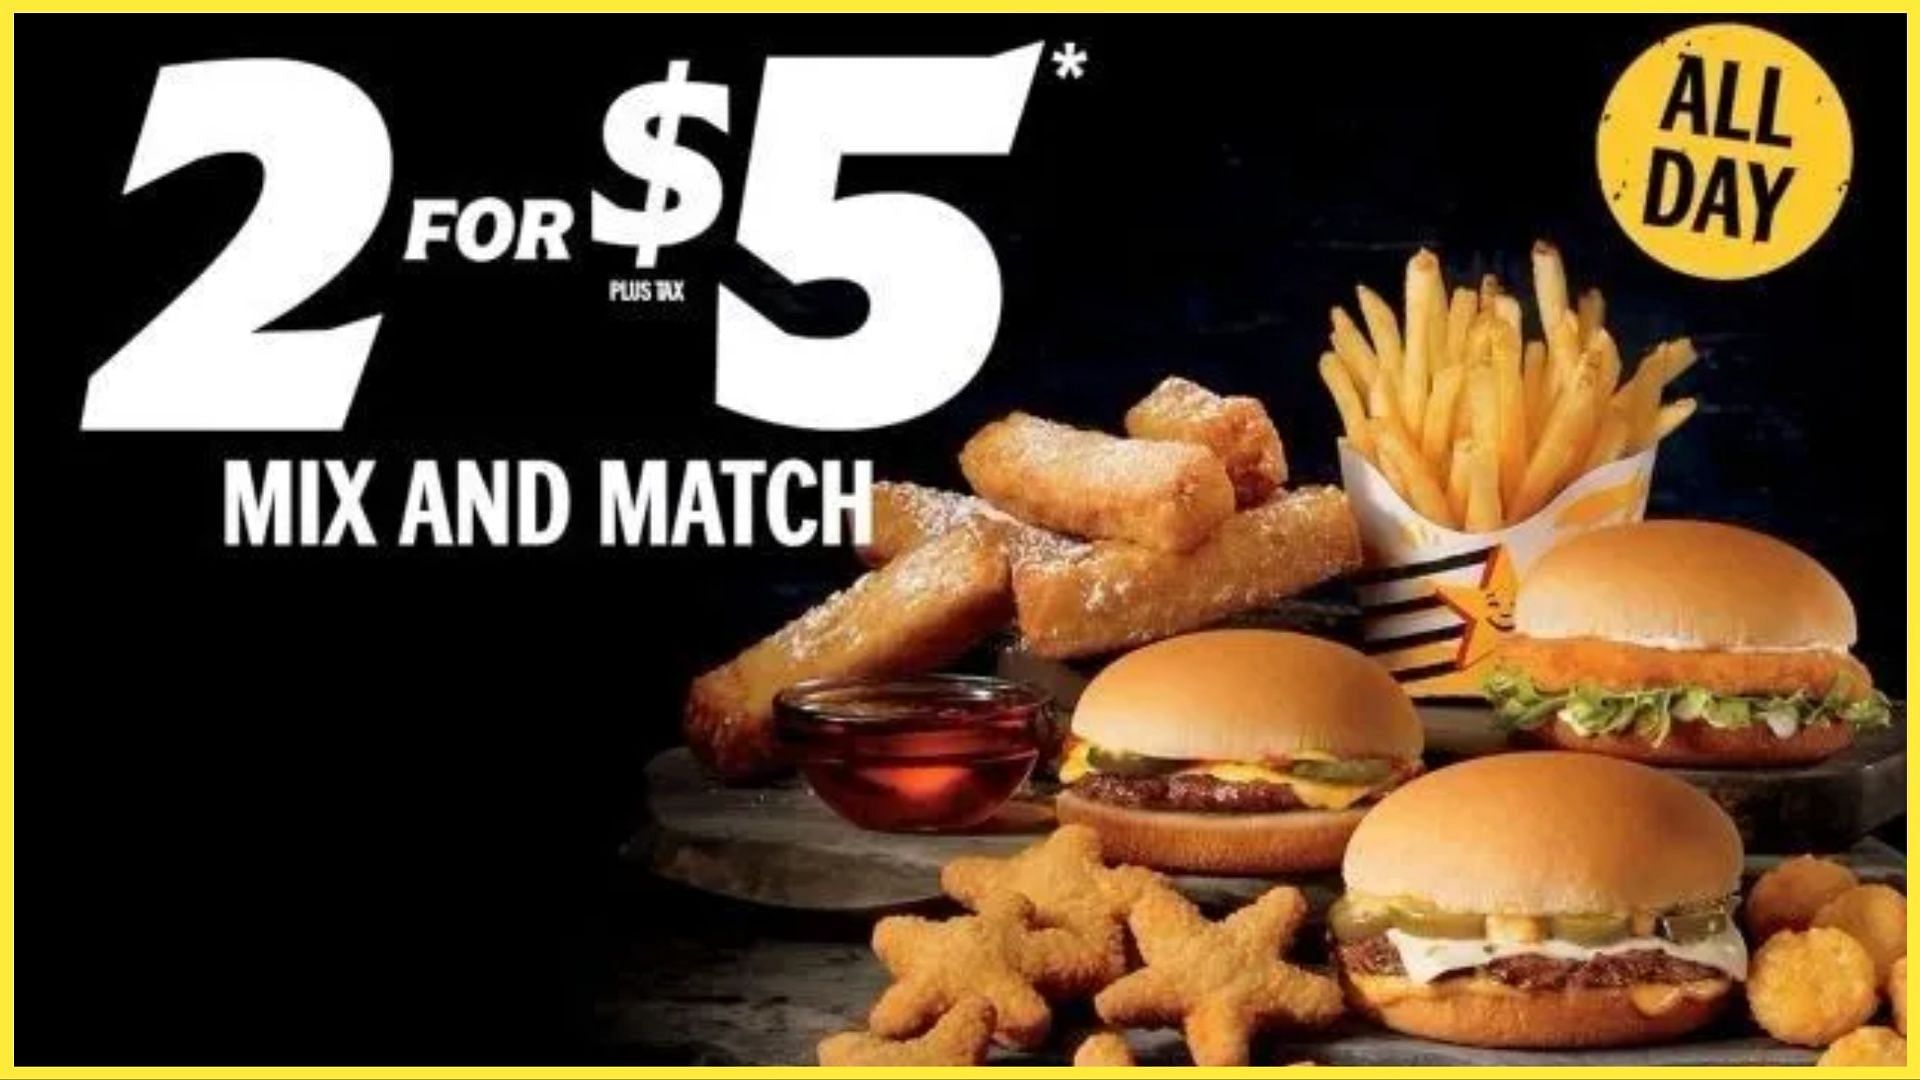 Carl's Jr. allday mix and match deal explored as brand launches new